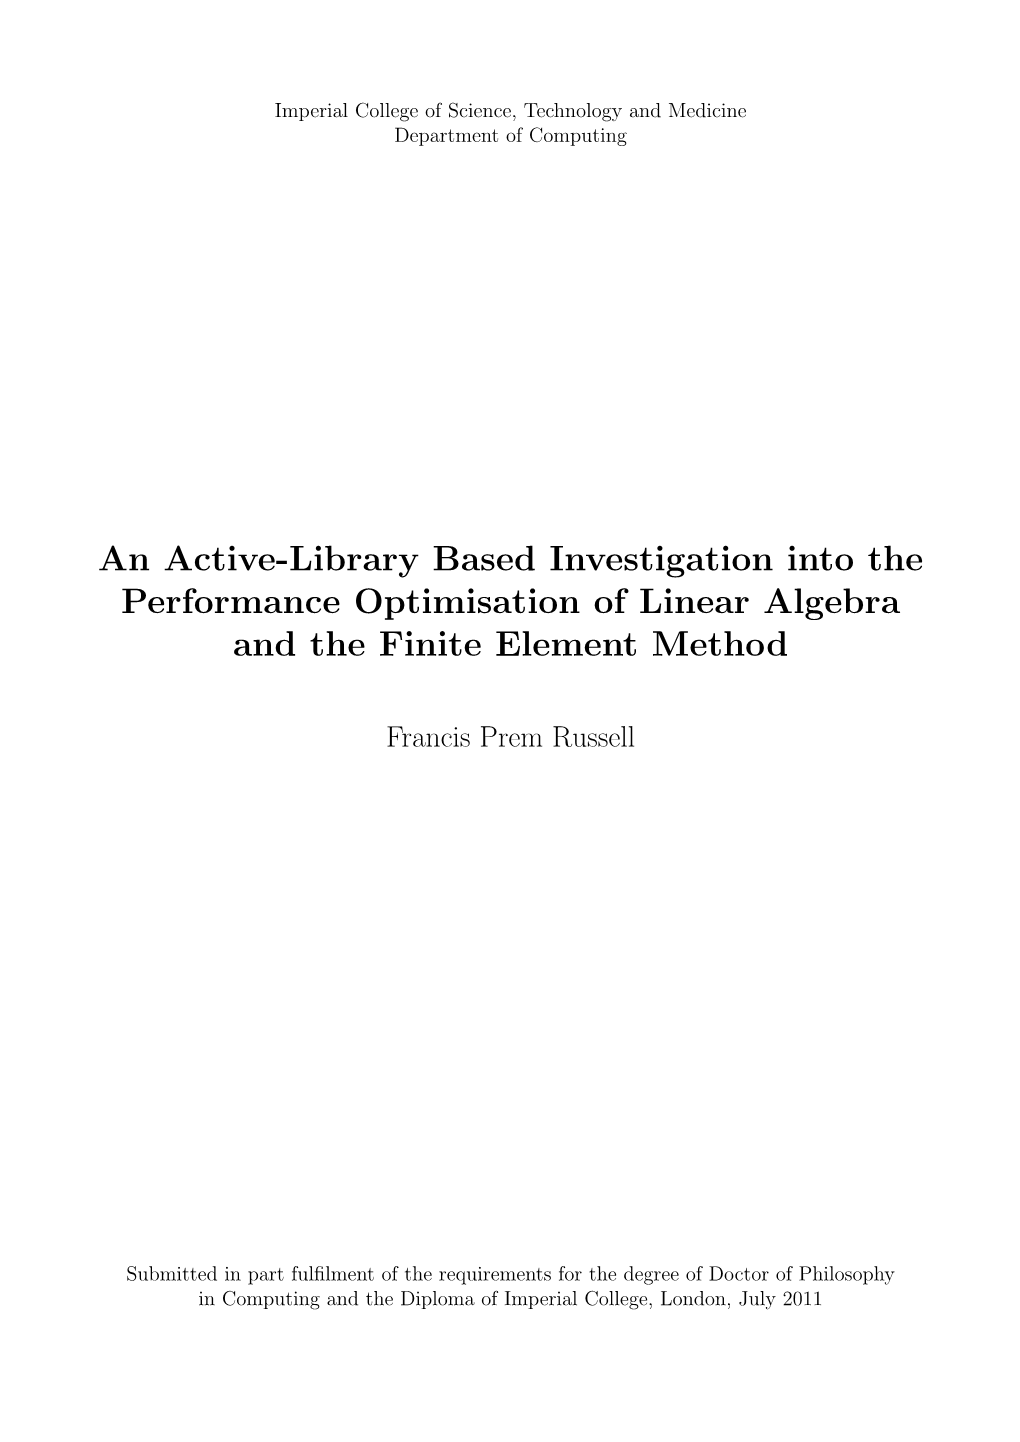 An Active-Library Based Investigation Into the Performance Optimisation of Linear Algebra and the Finite Element Method